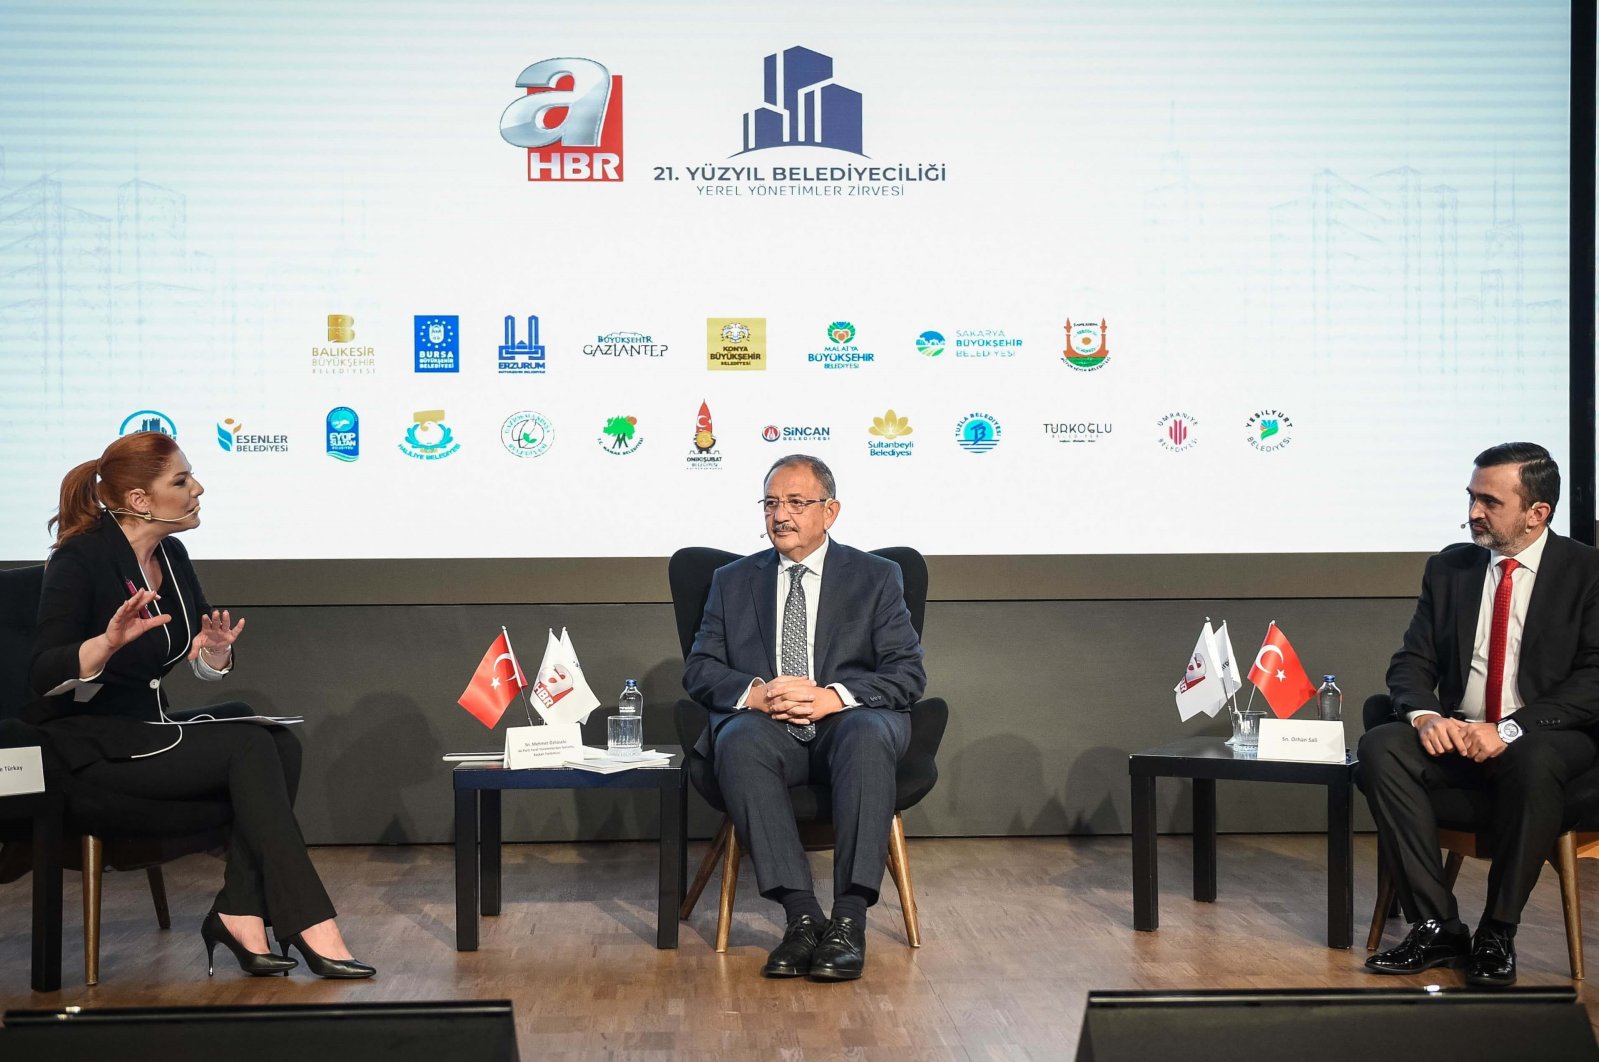 (L-R) A Haber Presenter Merve Türkay, Türkiye’s ruling Justice and Development Party (AK Party) Chairperson of Local Administrations Mehmet Özhaseki, and A News Editor-in-Chief Orhan Sali at the “21st Century Municipalism: Local Administrations Summit” held in Istanbul, Türkiye, Nov. 7, 2022. (Courtesy of A Haber)